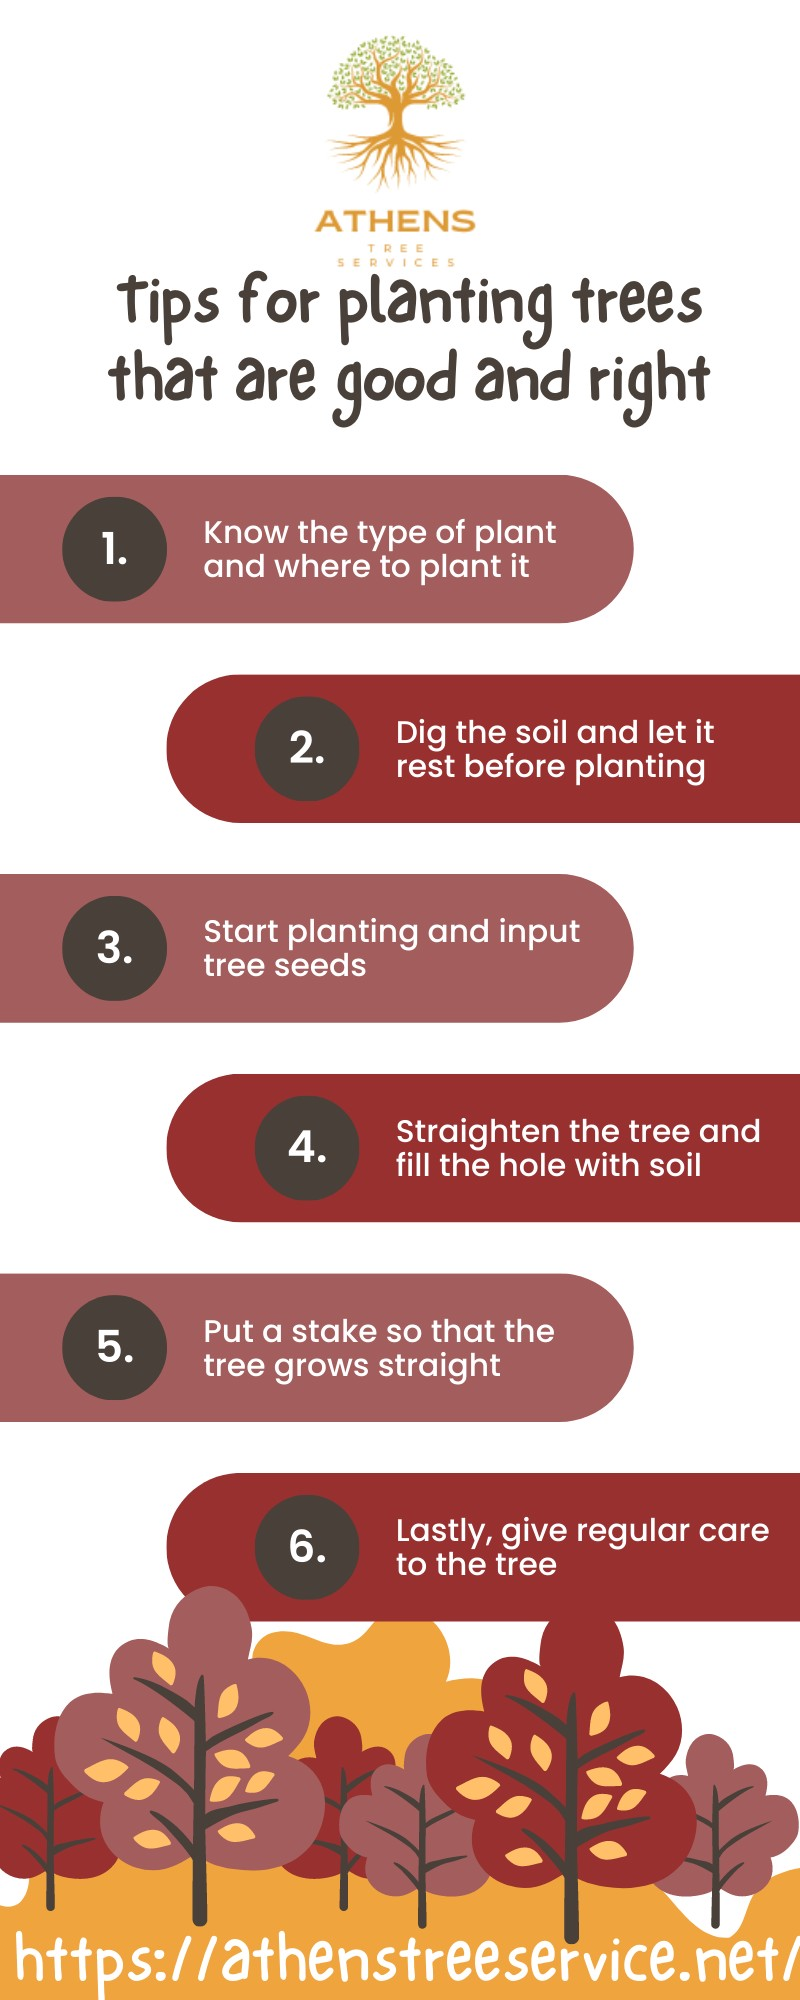 Tips for Planting Trees That are Good and Right [Infographic]